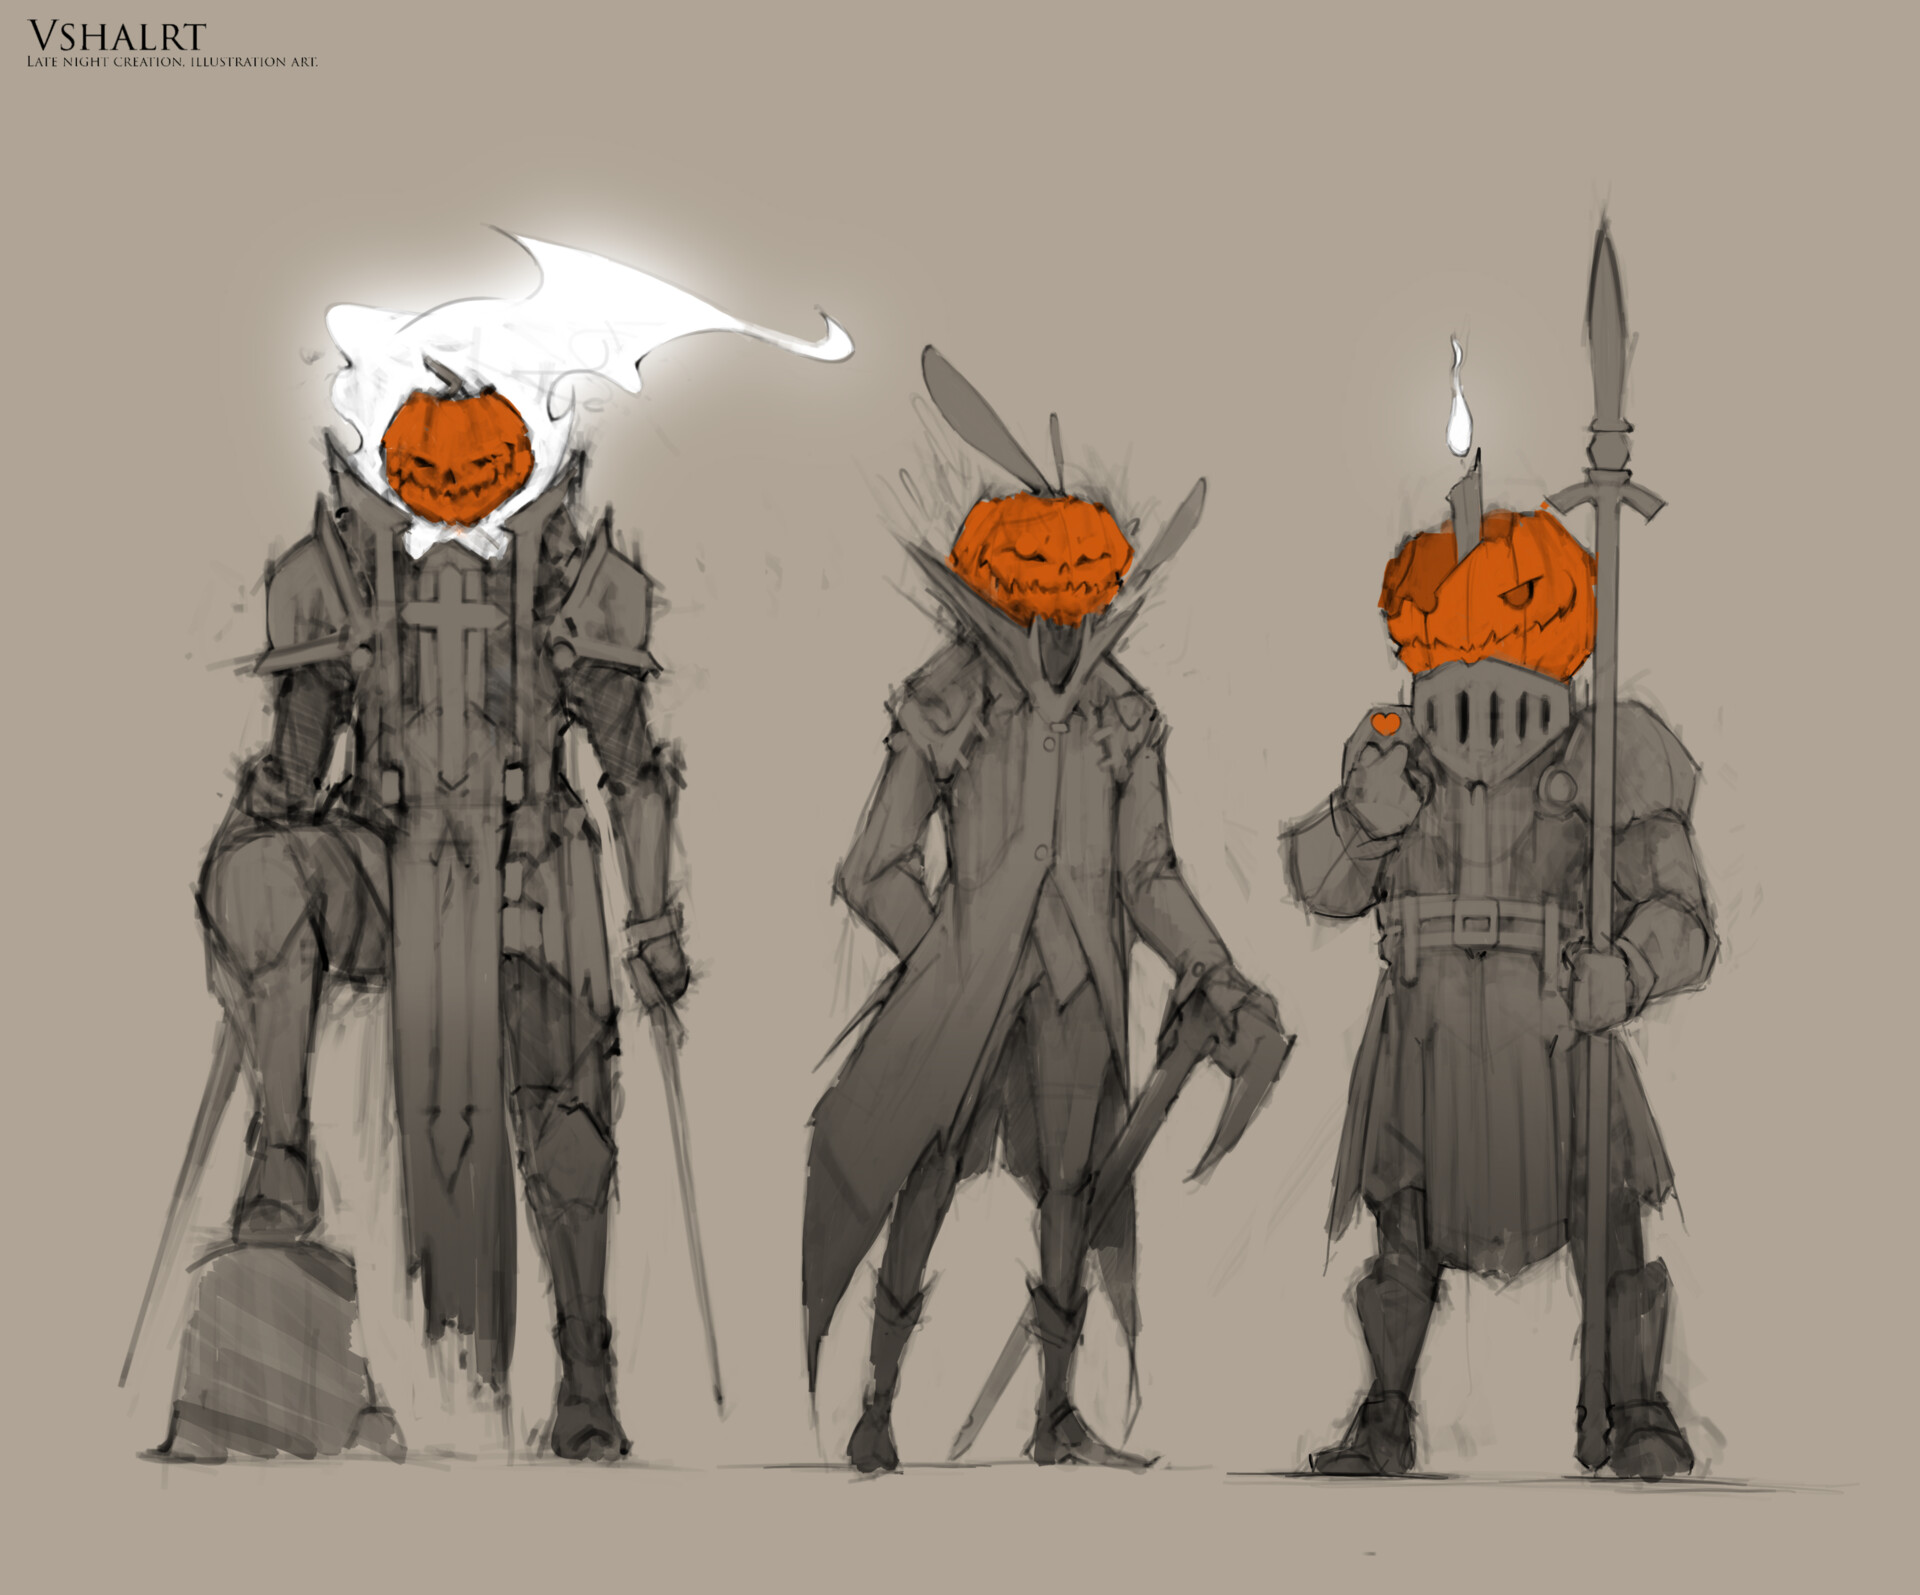 Get Into the Halloween Spirit with These PumpkinHeaded Characters